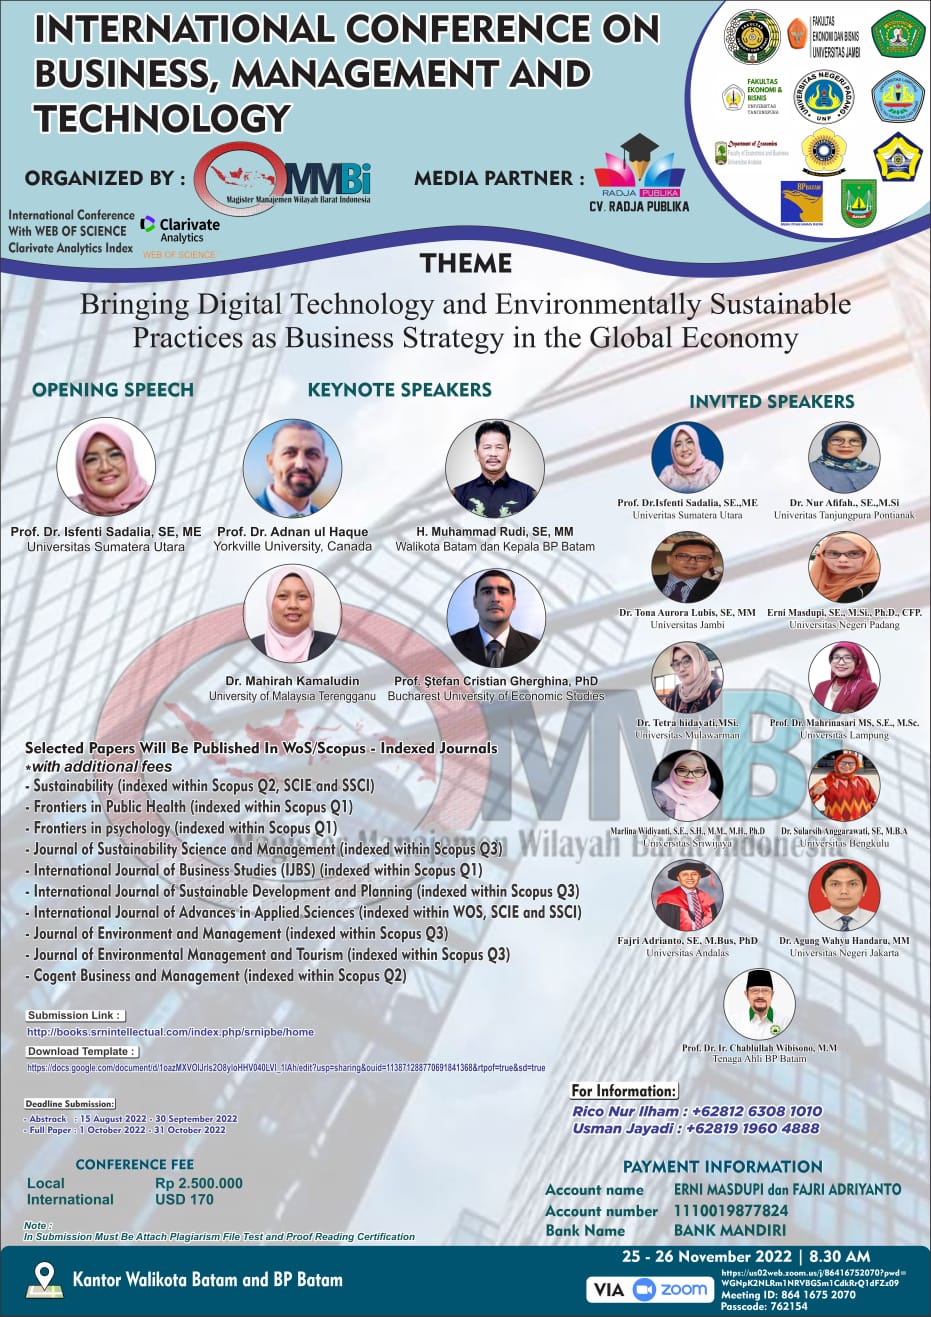 INTERNATIONAL CONFERENCE ON BUSINESS, MANAGEMENT AND TECHNOLOGY